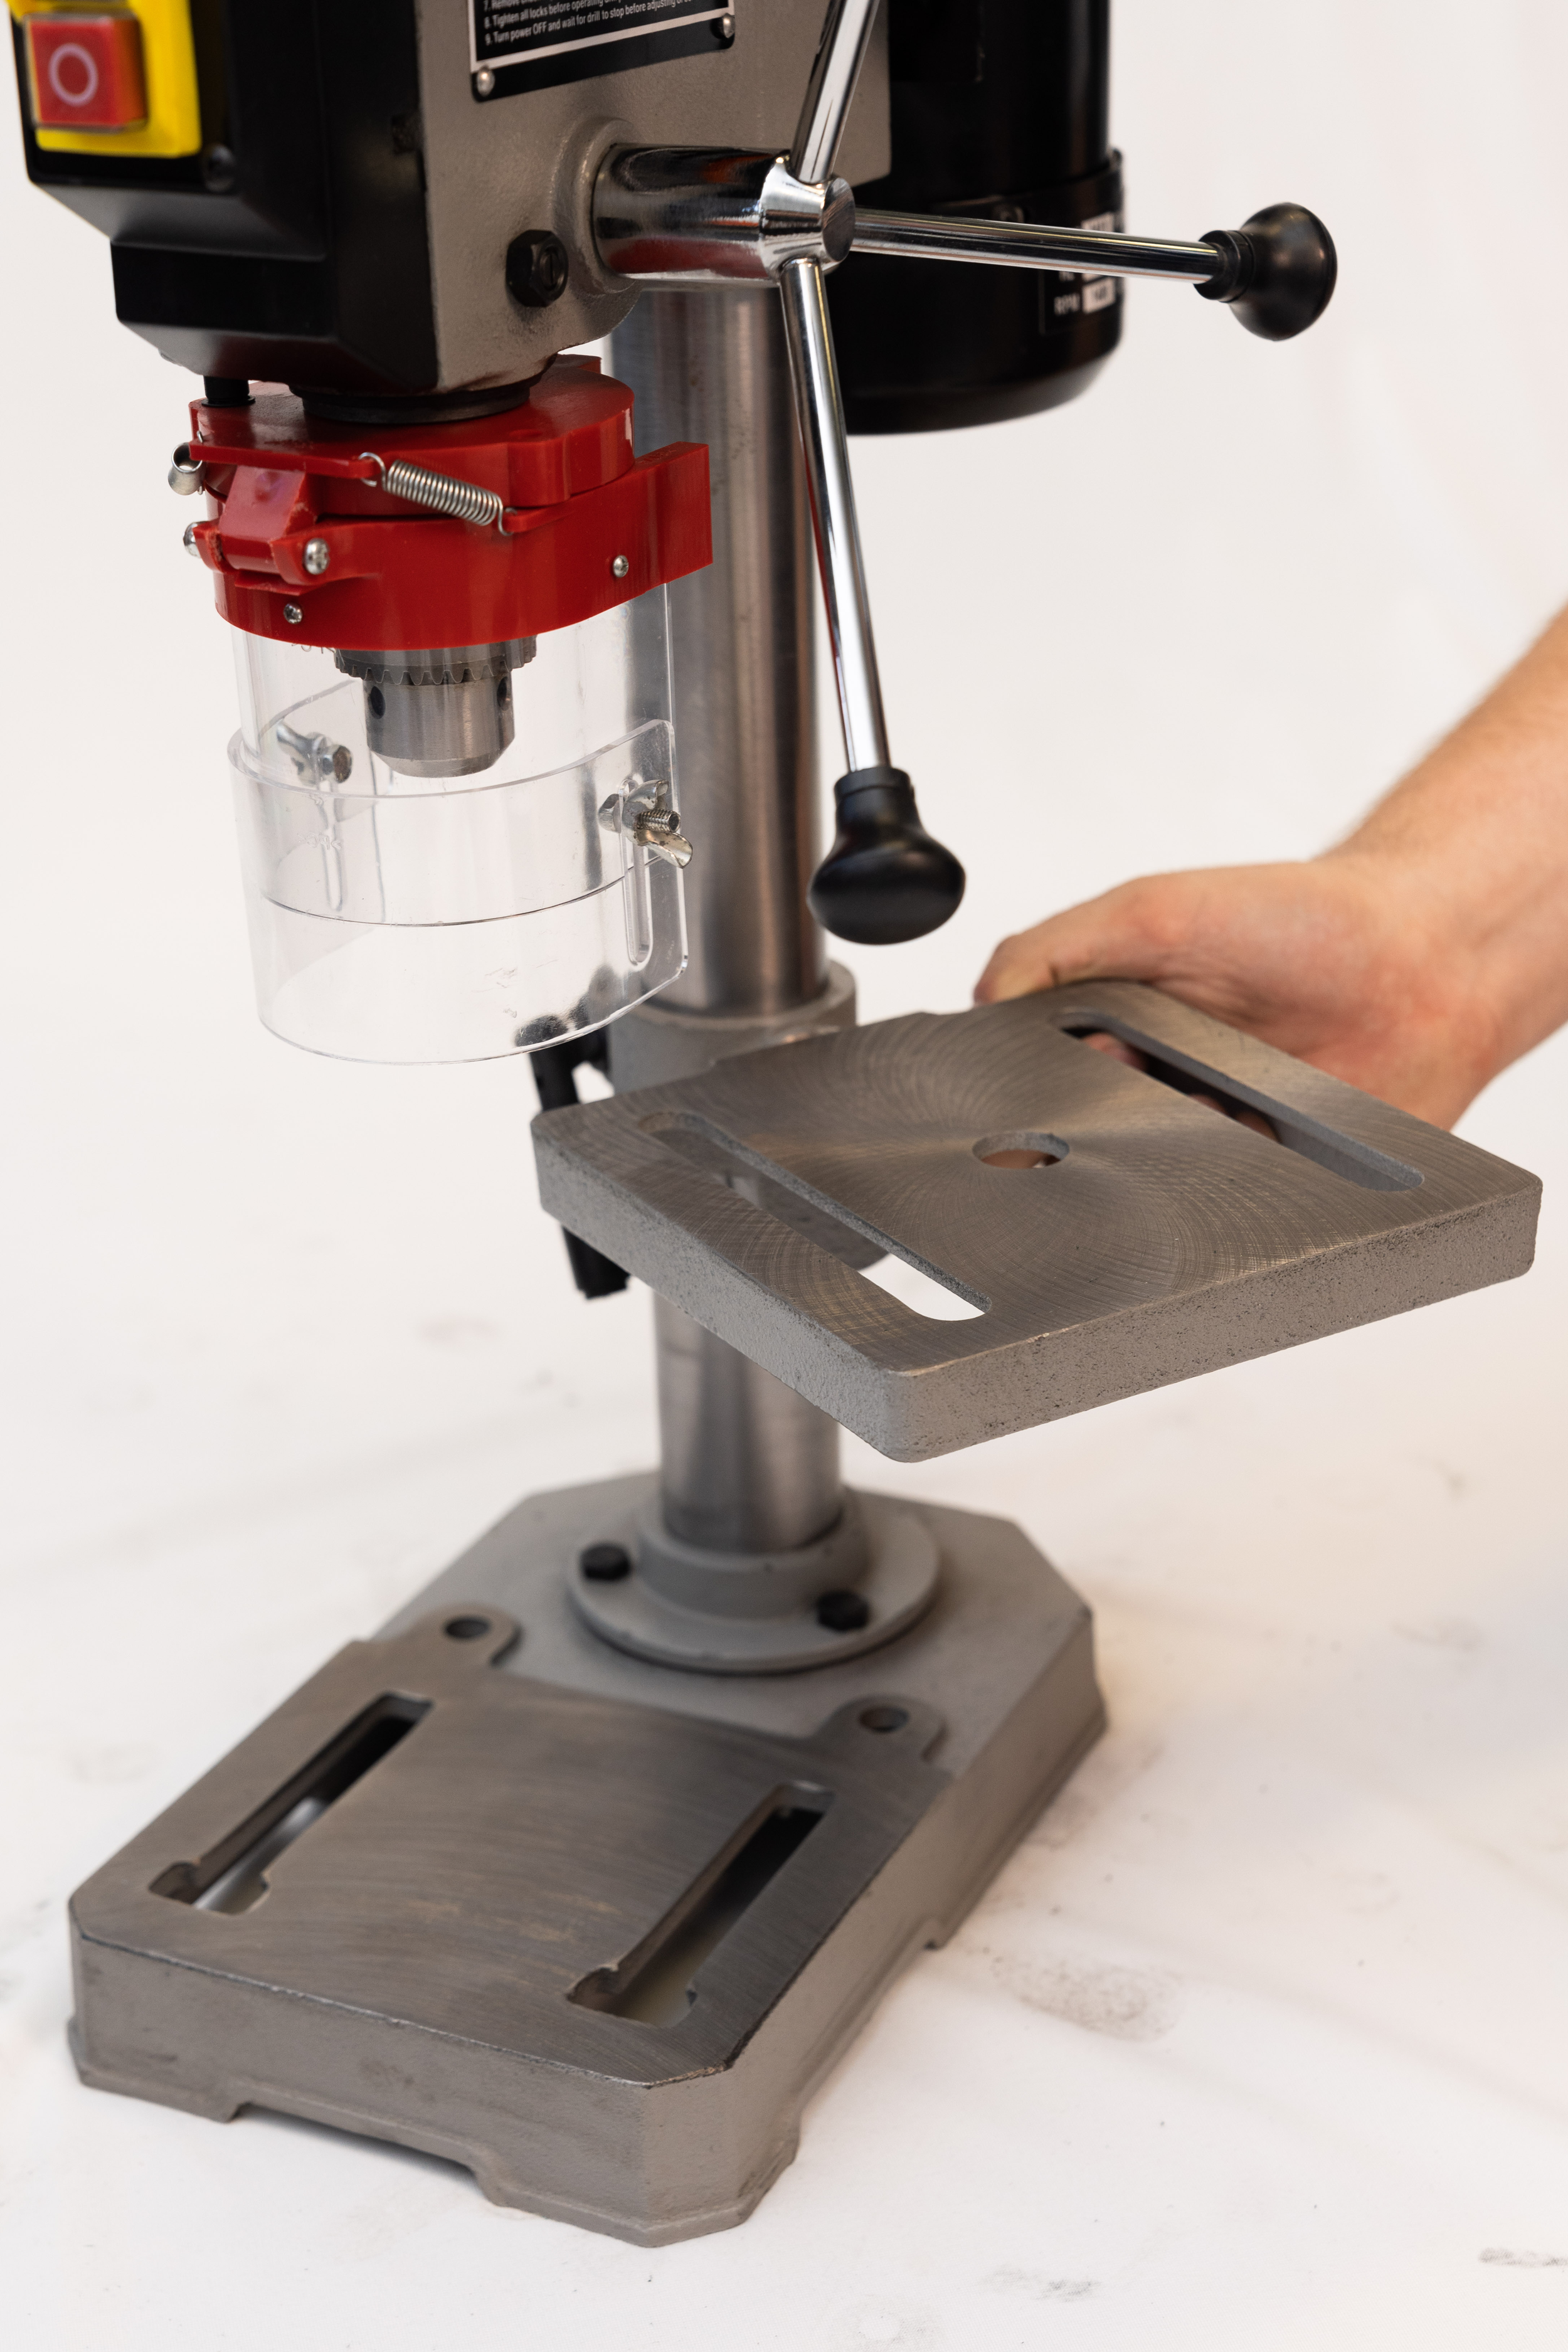 200mm (8") 0.25HP Benchtop Drill Press DP20013B by Oltre